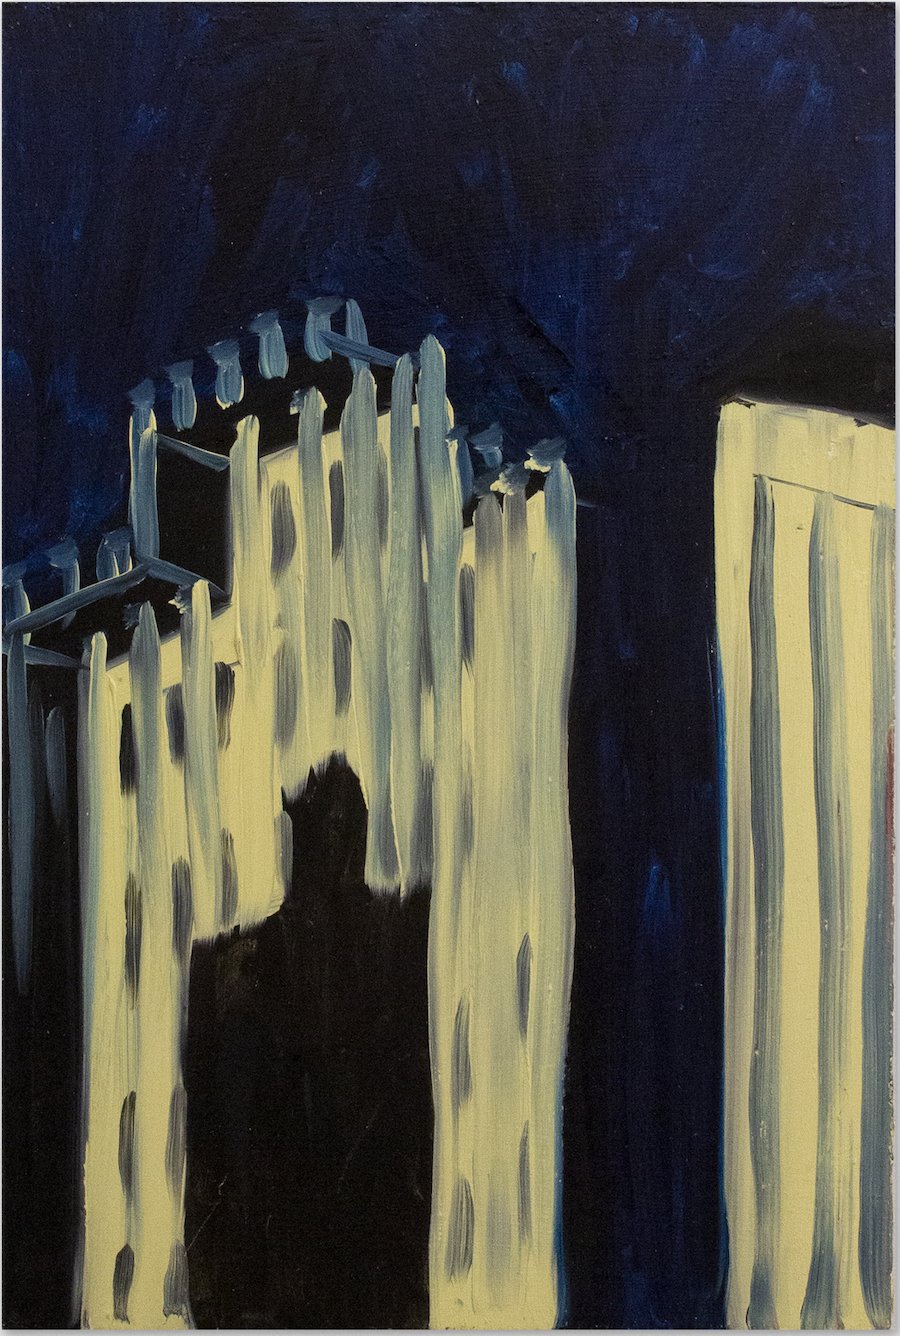   Study for “Facade,”  1982. Oil on panel. 21 x 14 in. 